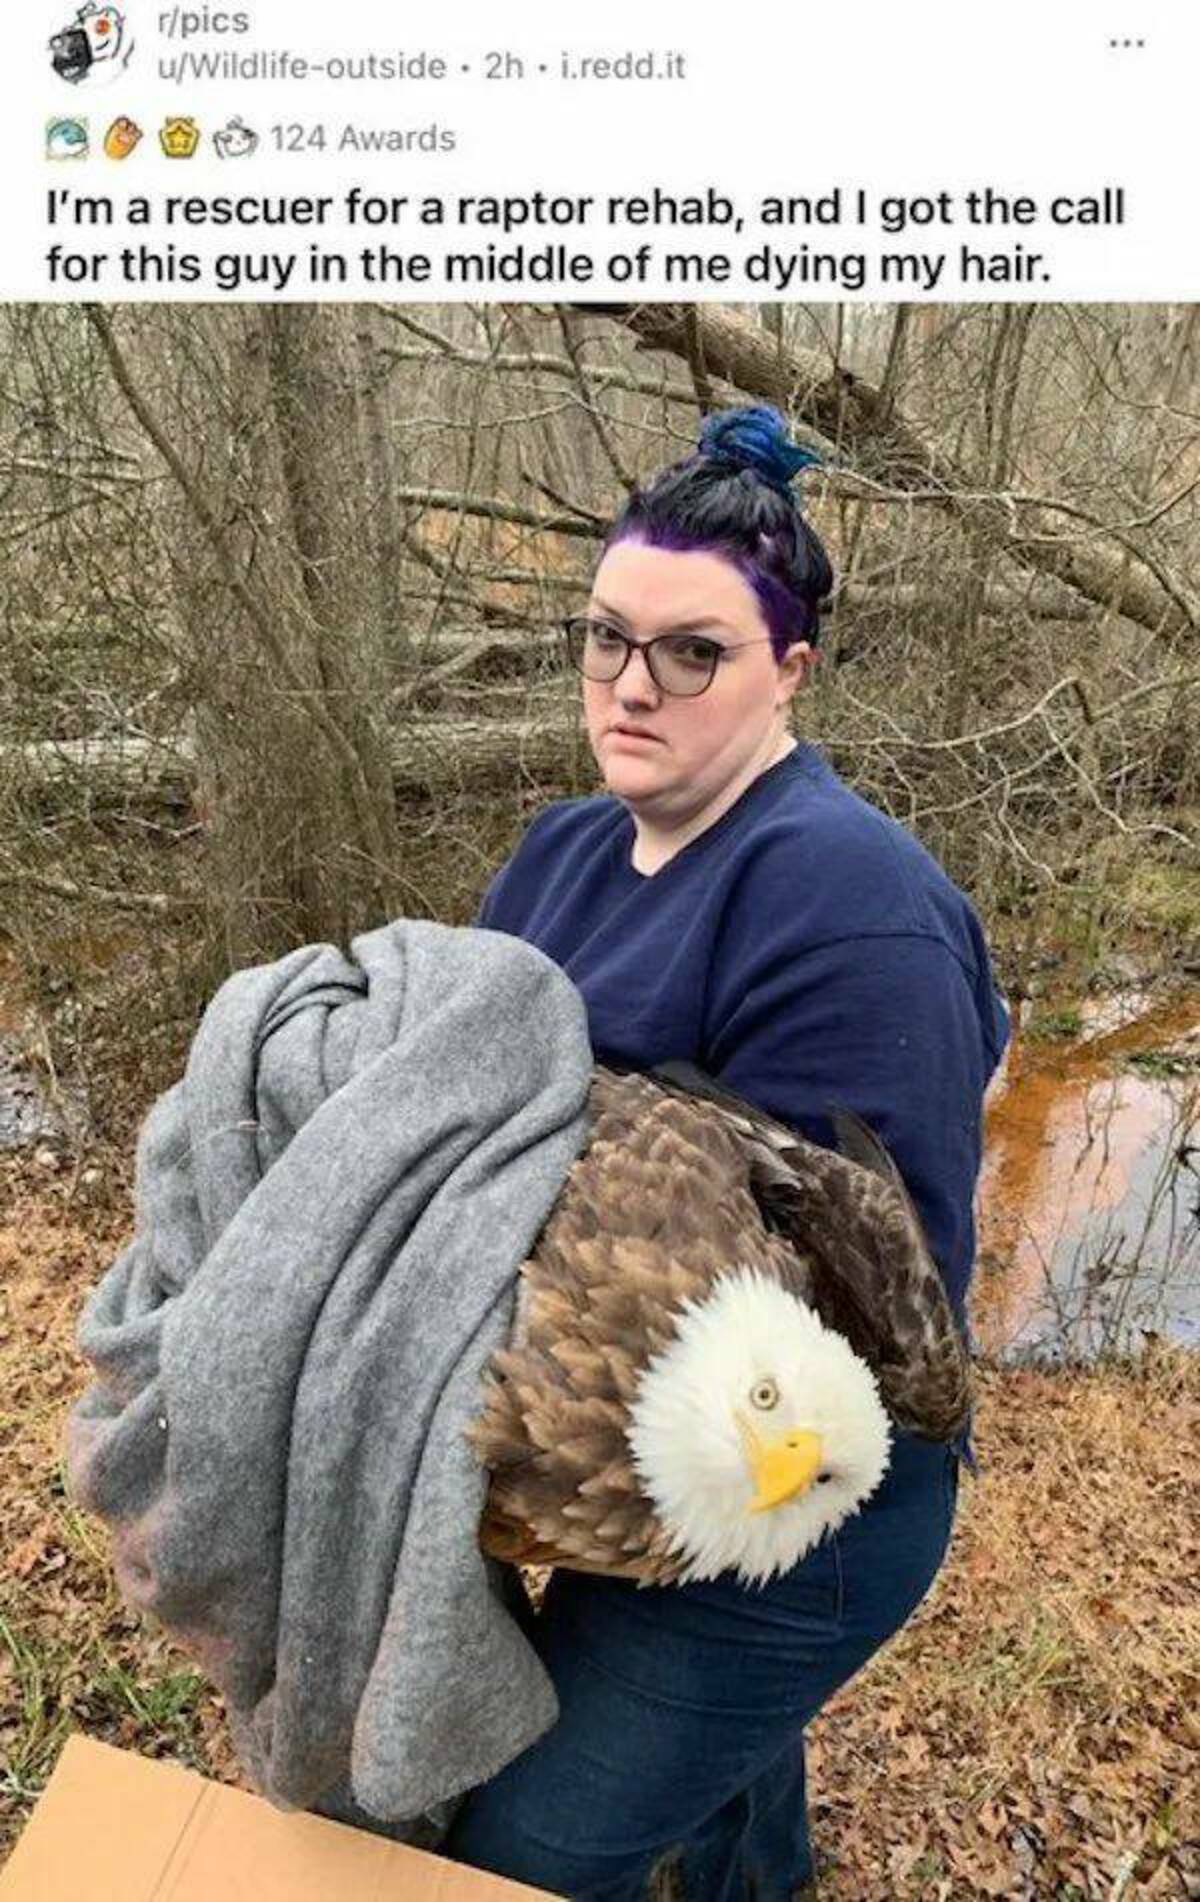 Internet meme - rpics uWildlifeoutside. 2h. i.redd.it 124 Awards I'm a rescuer for a raptor rehab, and I got the call for this guy in the middle of me dying my hair.